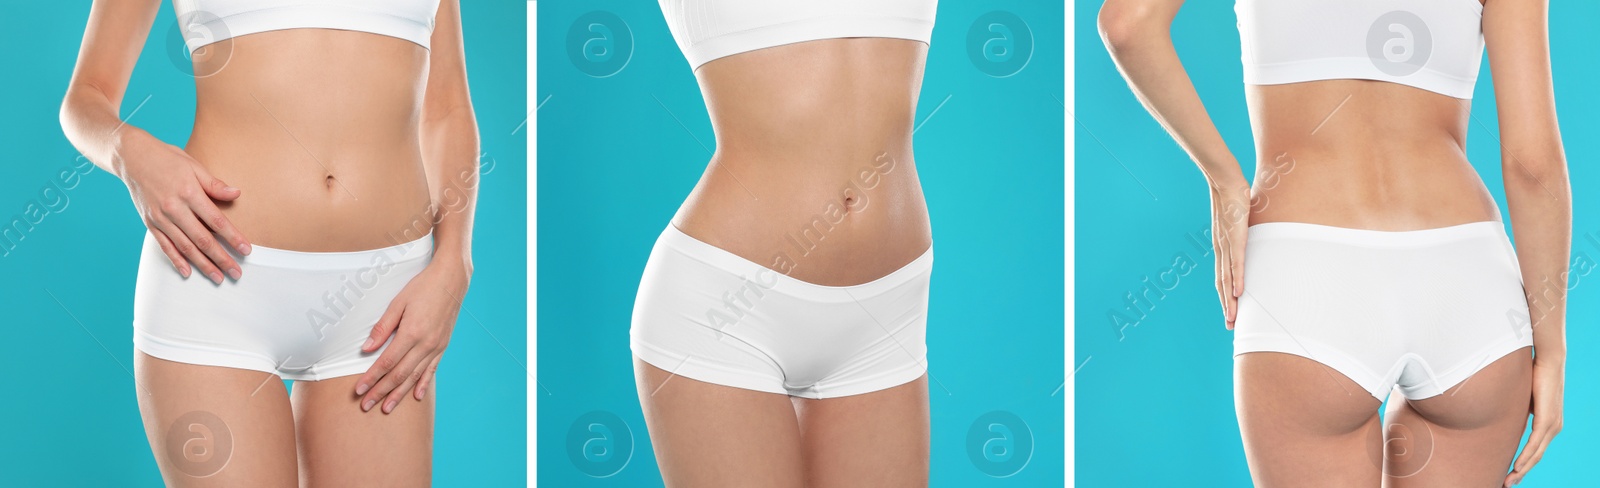 Image of Closeup view of women with slim bodies on light blue background, collage. Banner design